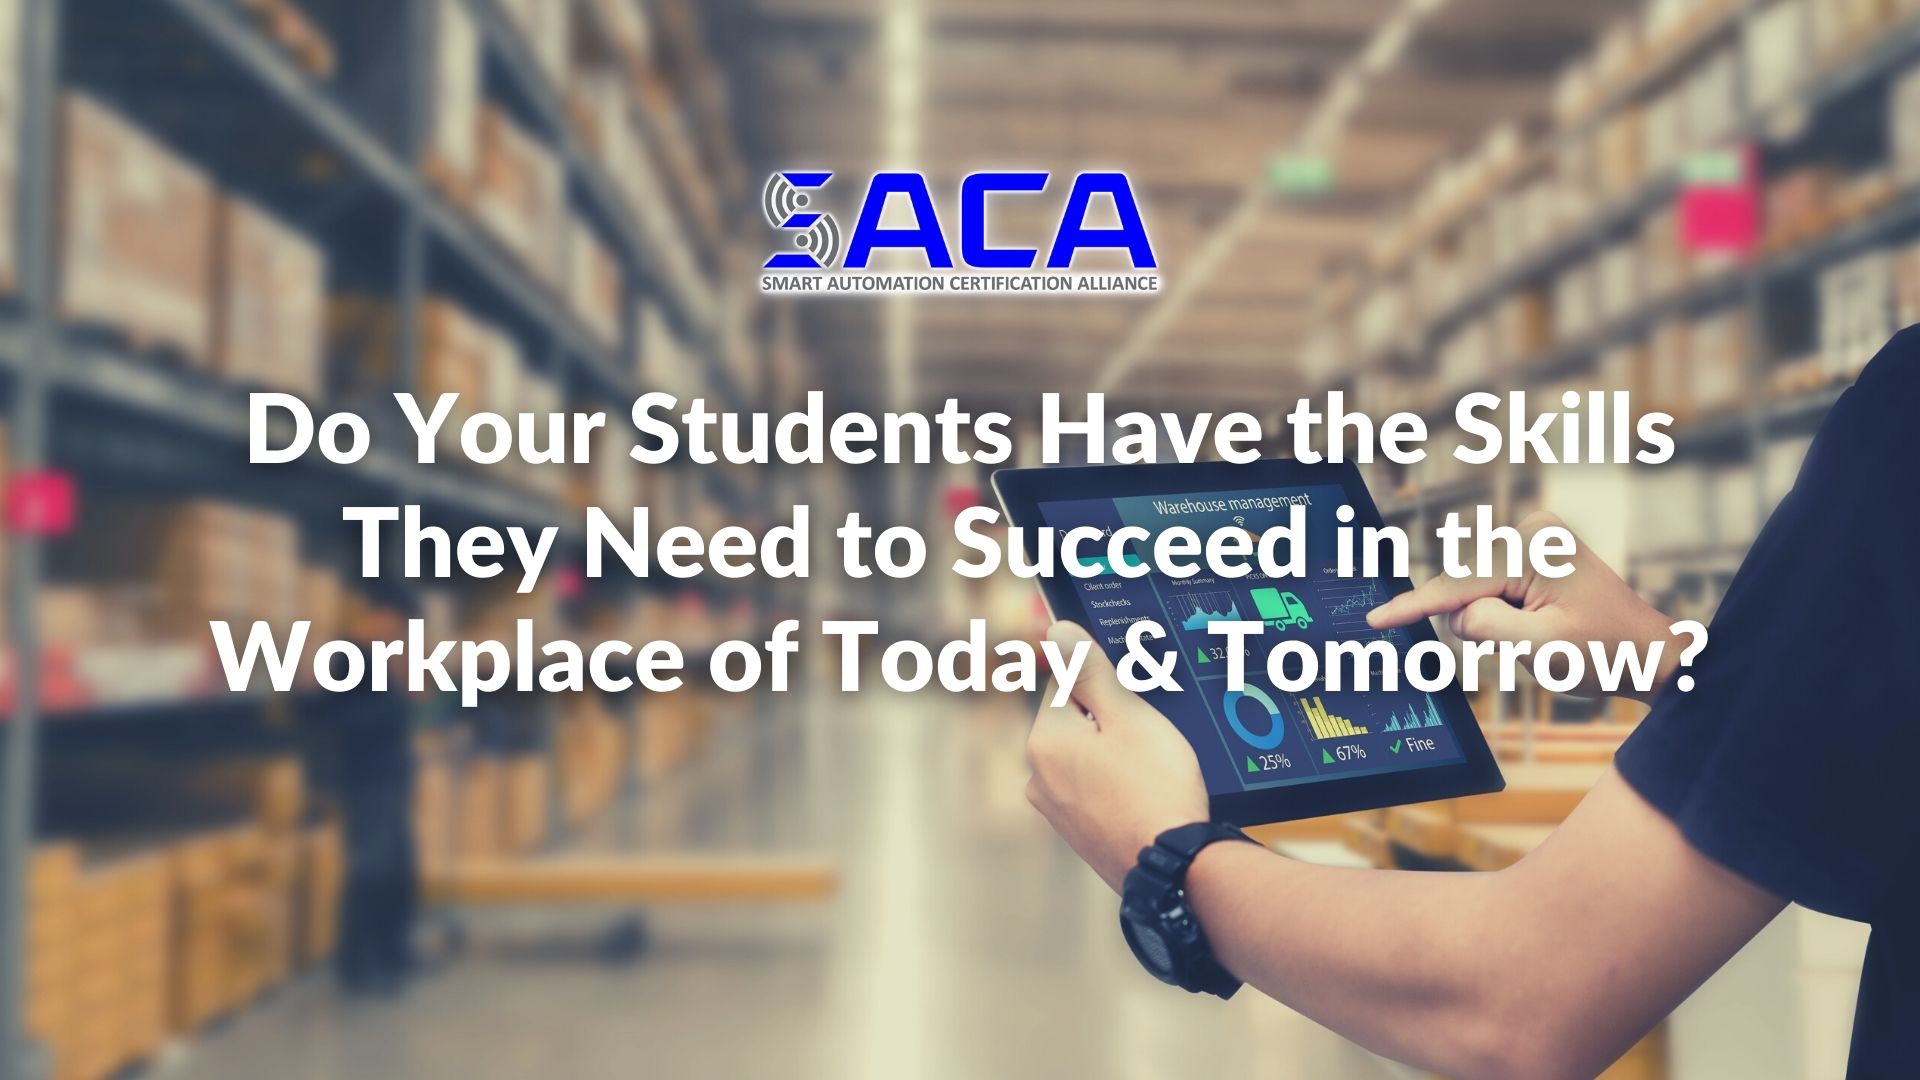 SACA - Do Your Students Have the Skills They Need to Succeed in the Workplace of Today and Tomorrow